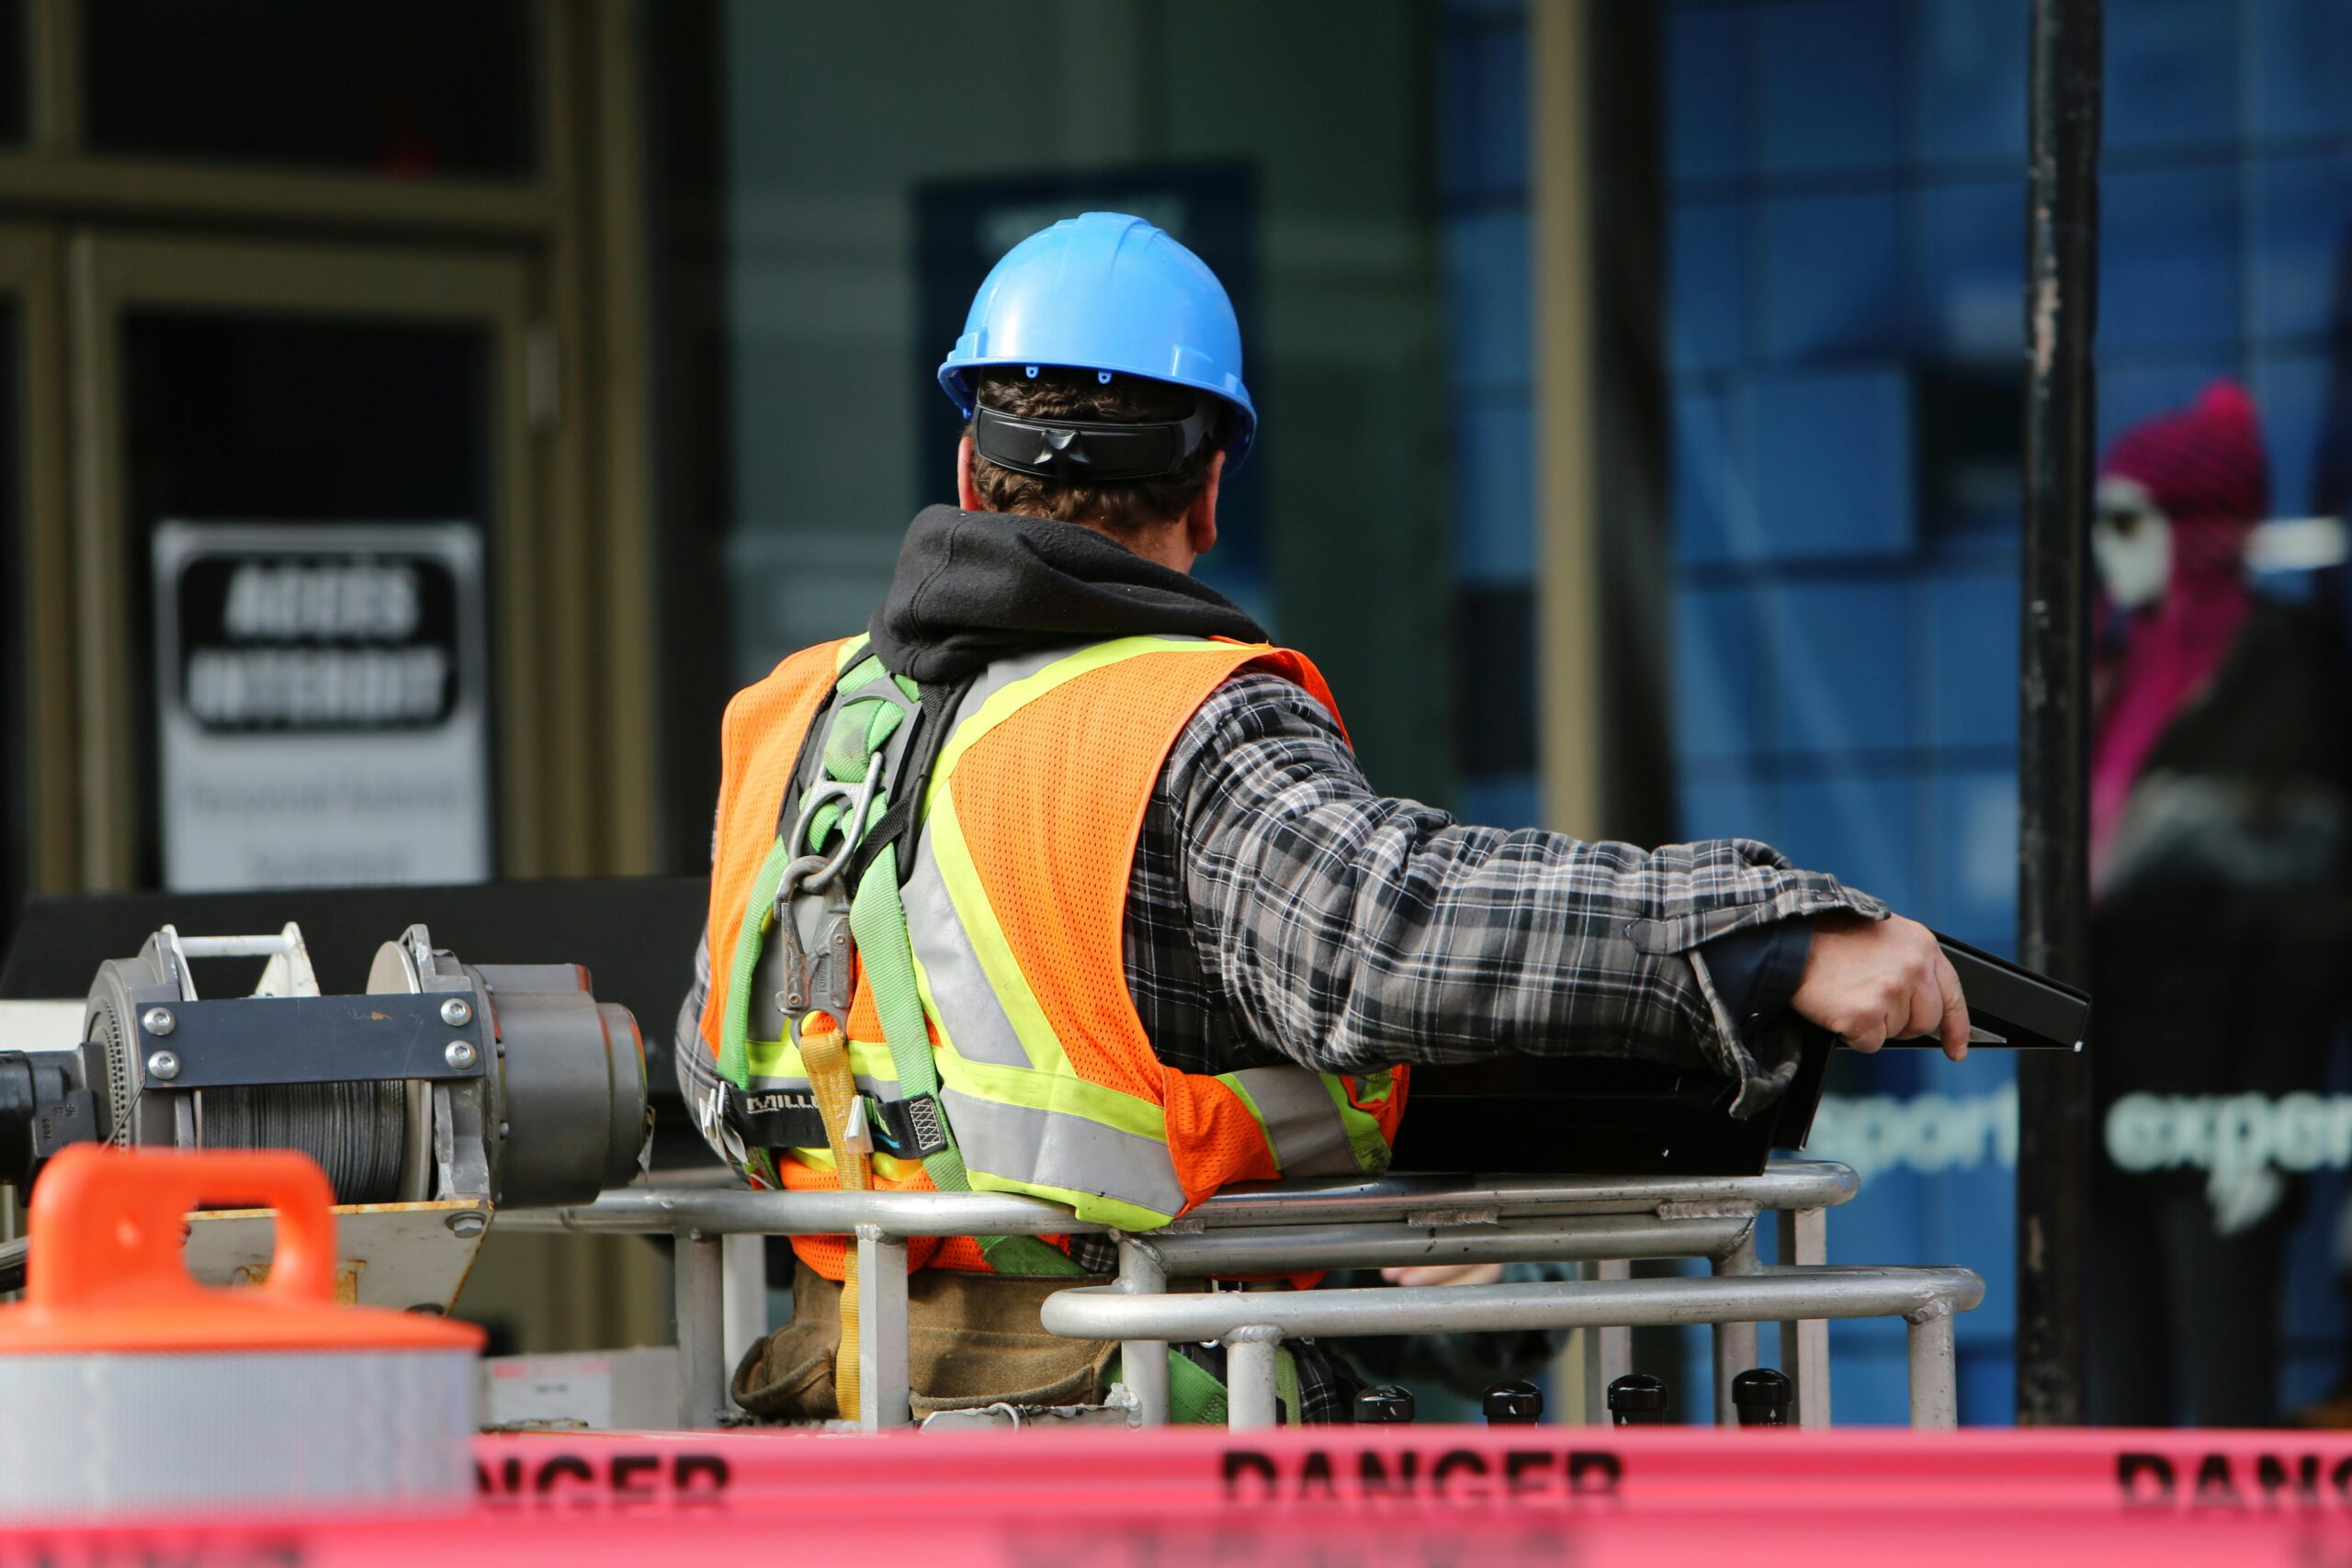 The Best Ways to Improve Construction Safety